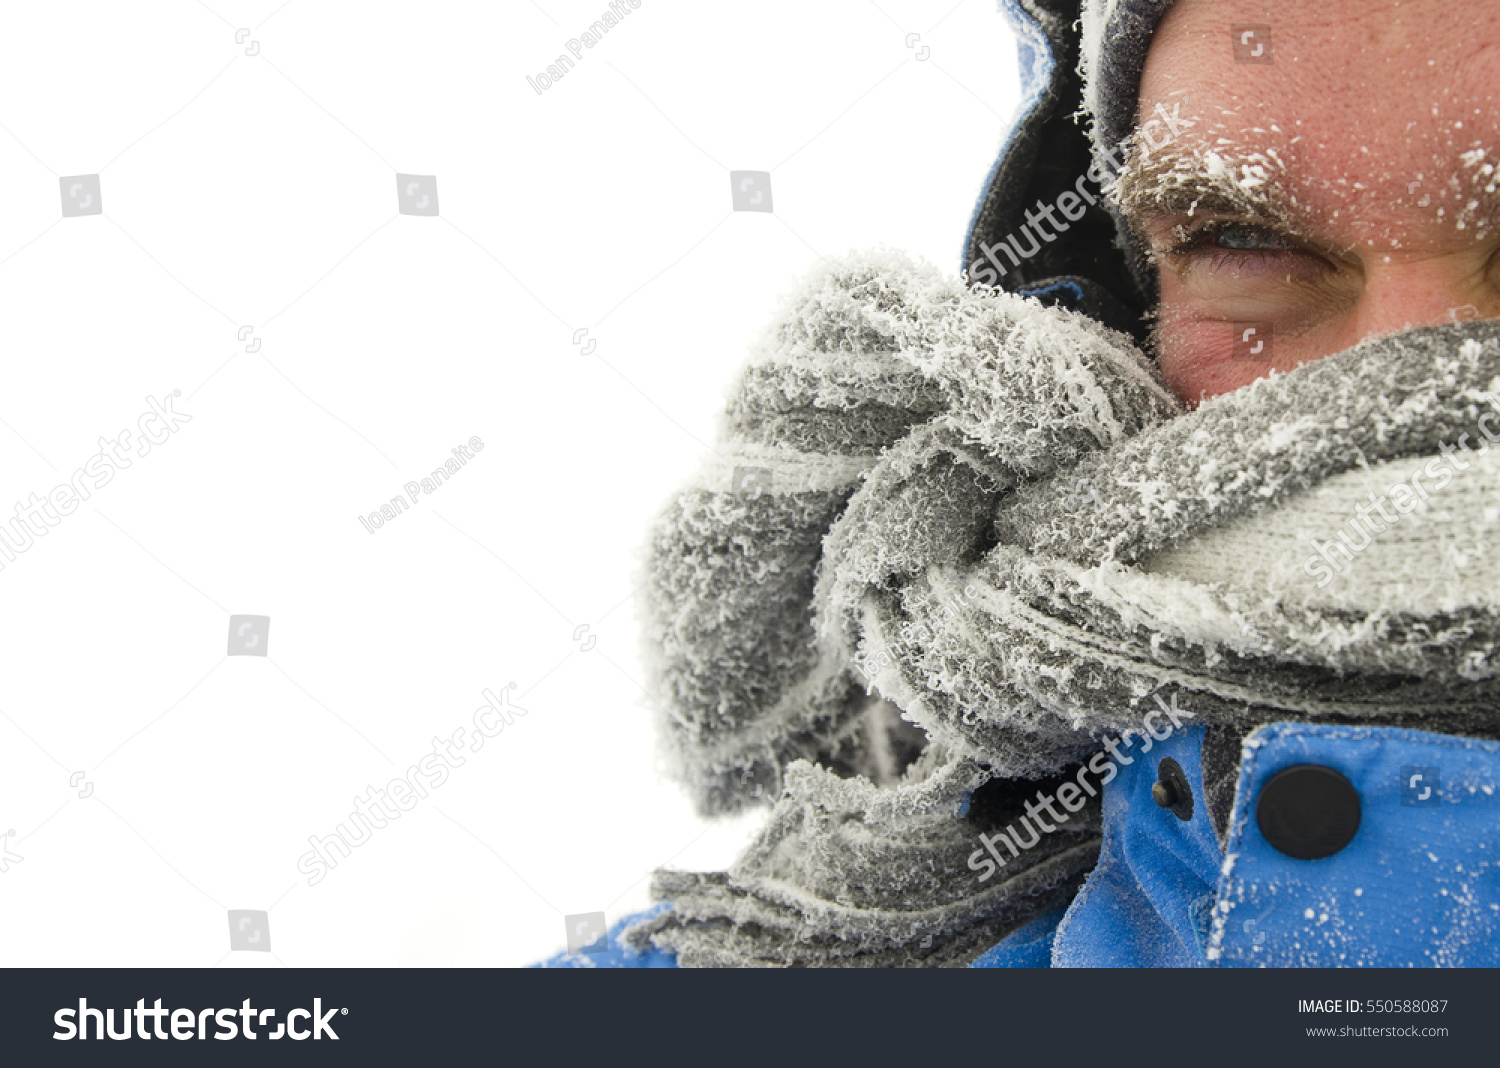 frozen man face in winter scene isolated on white background    #550588087